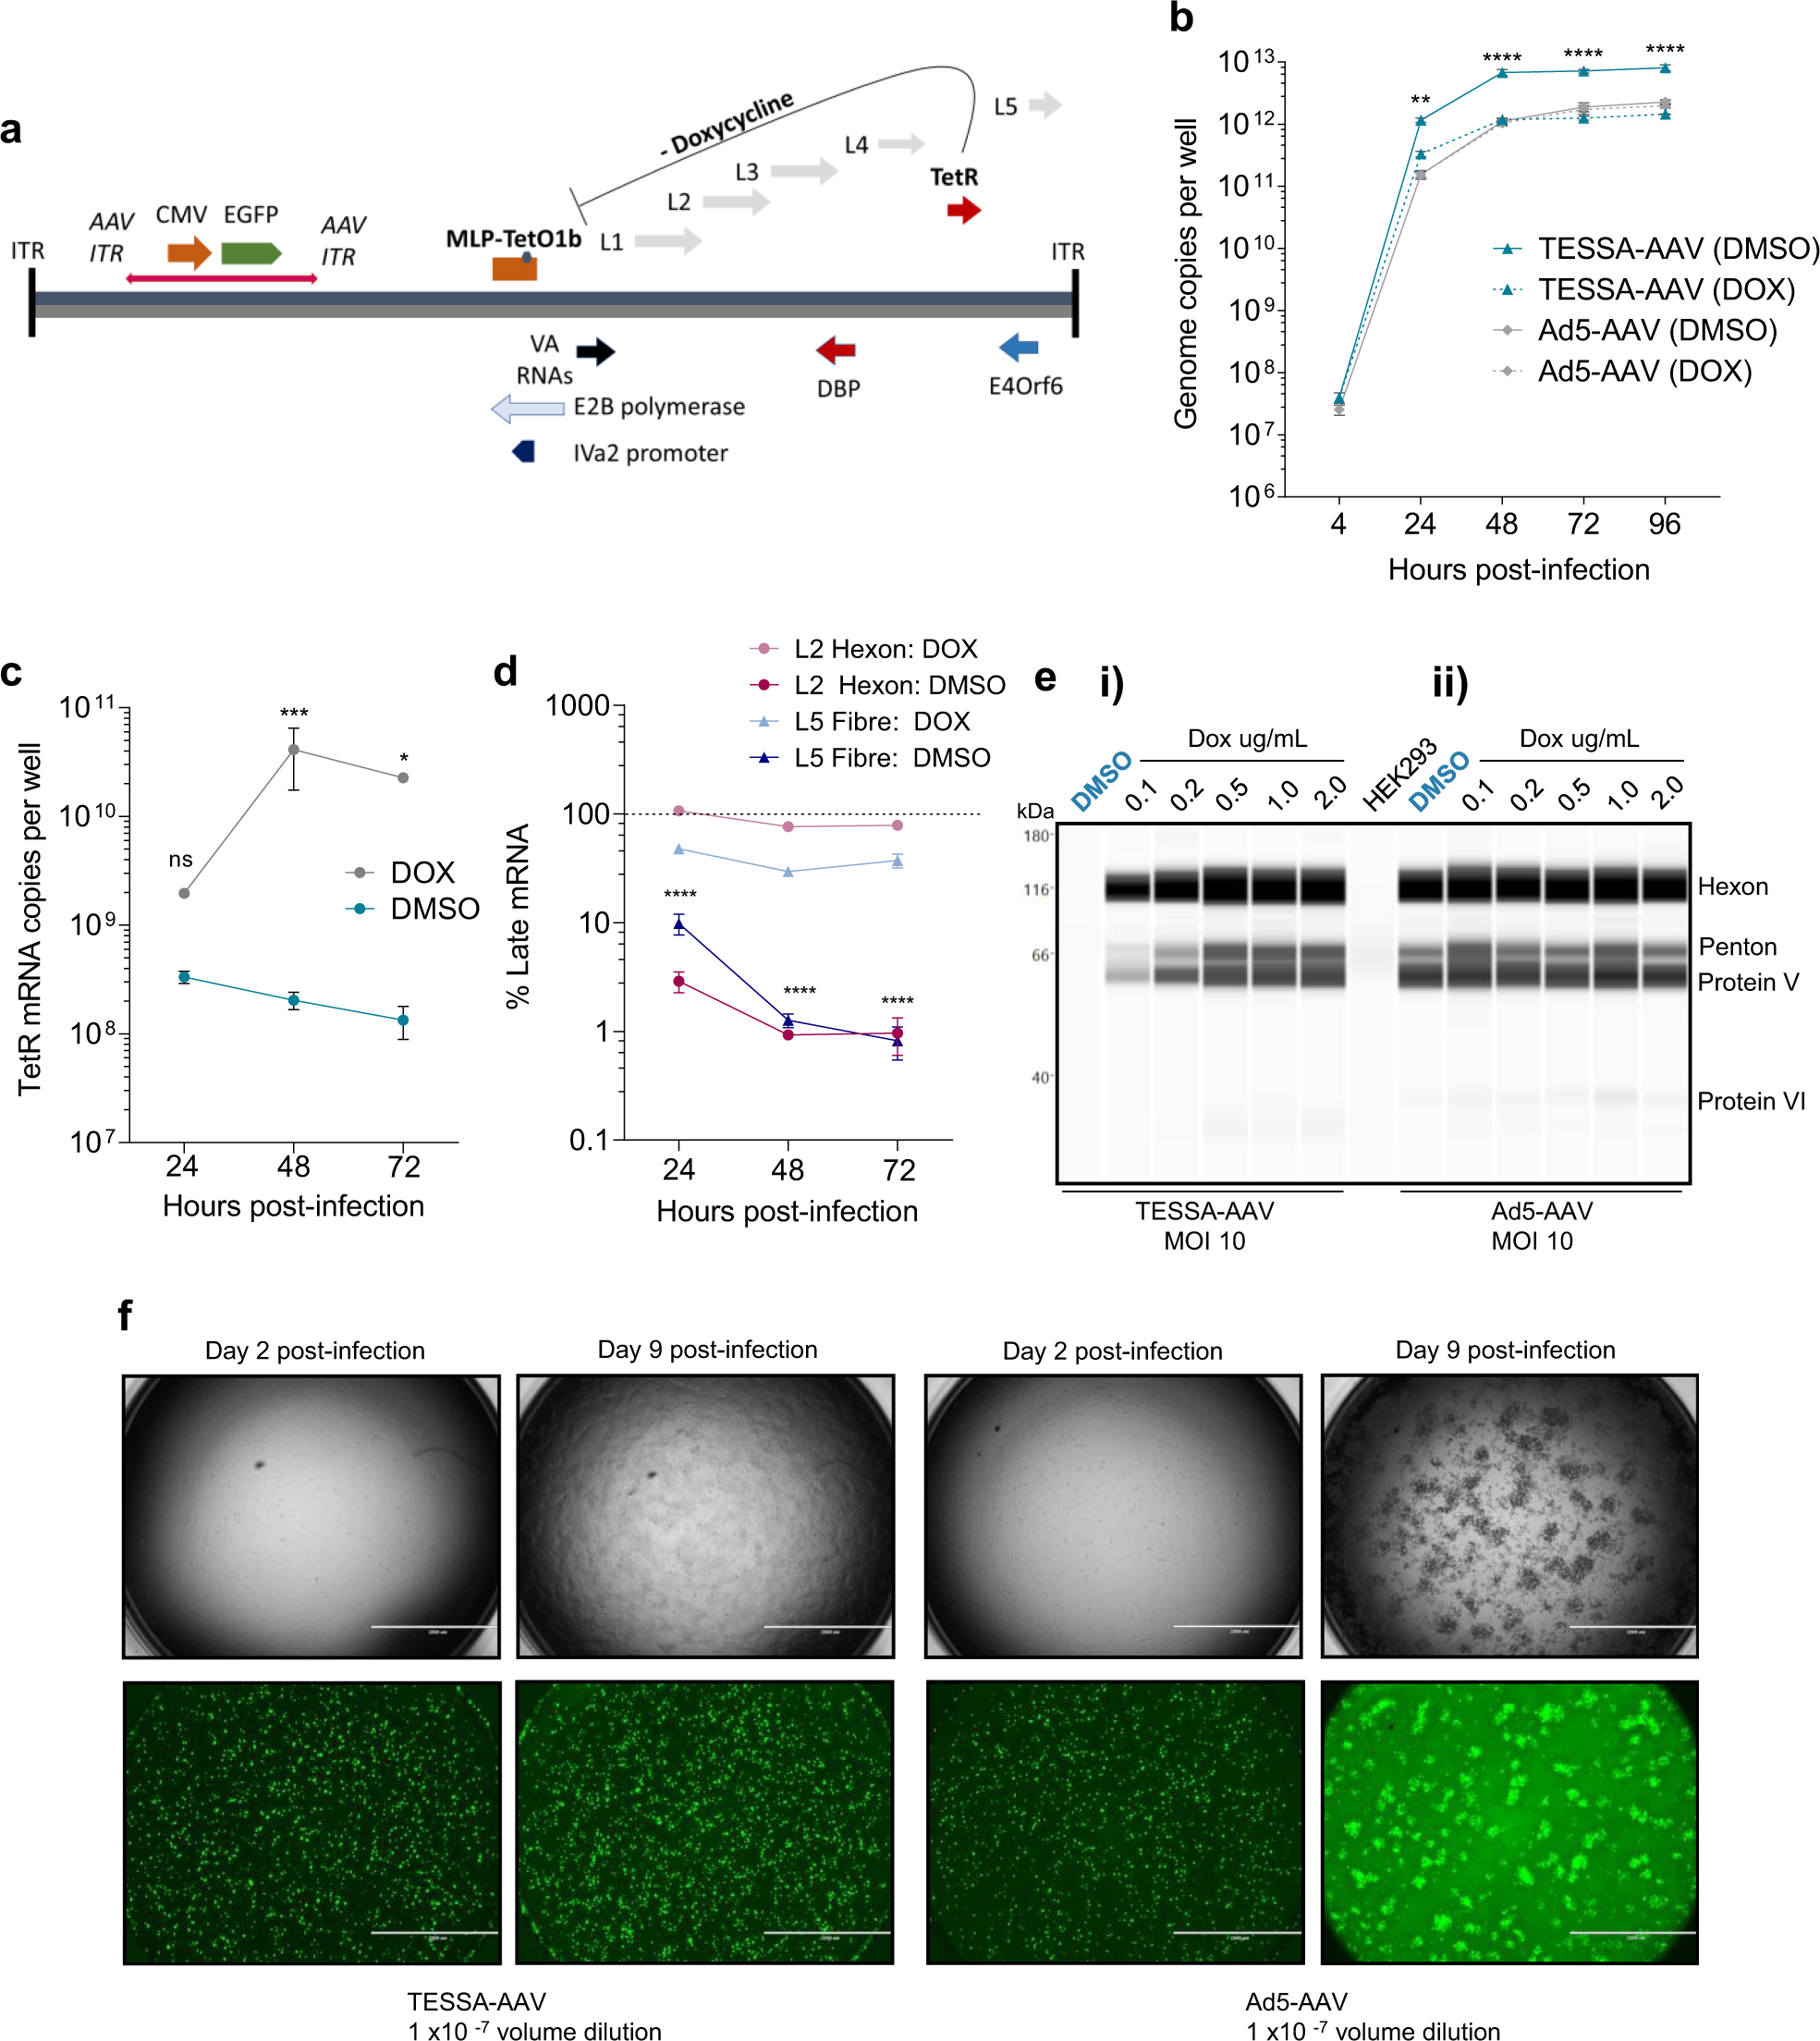 Self-attenuating adenovirus enables production of recombinant  adeno-associated virus for high manufacturing yield without contamination |  Nature Communications